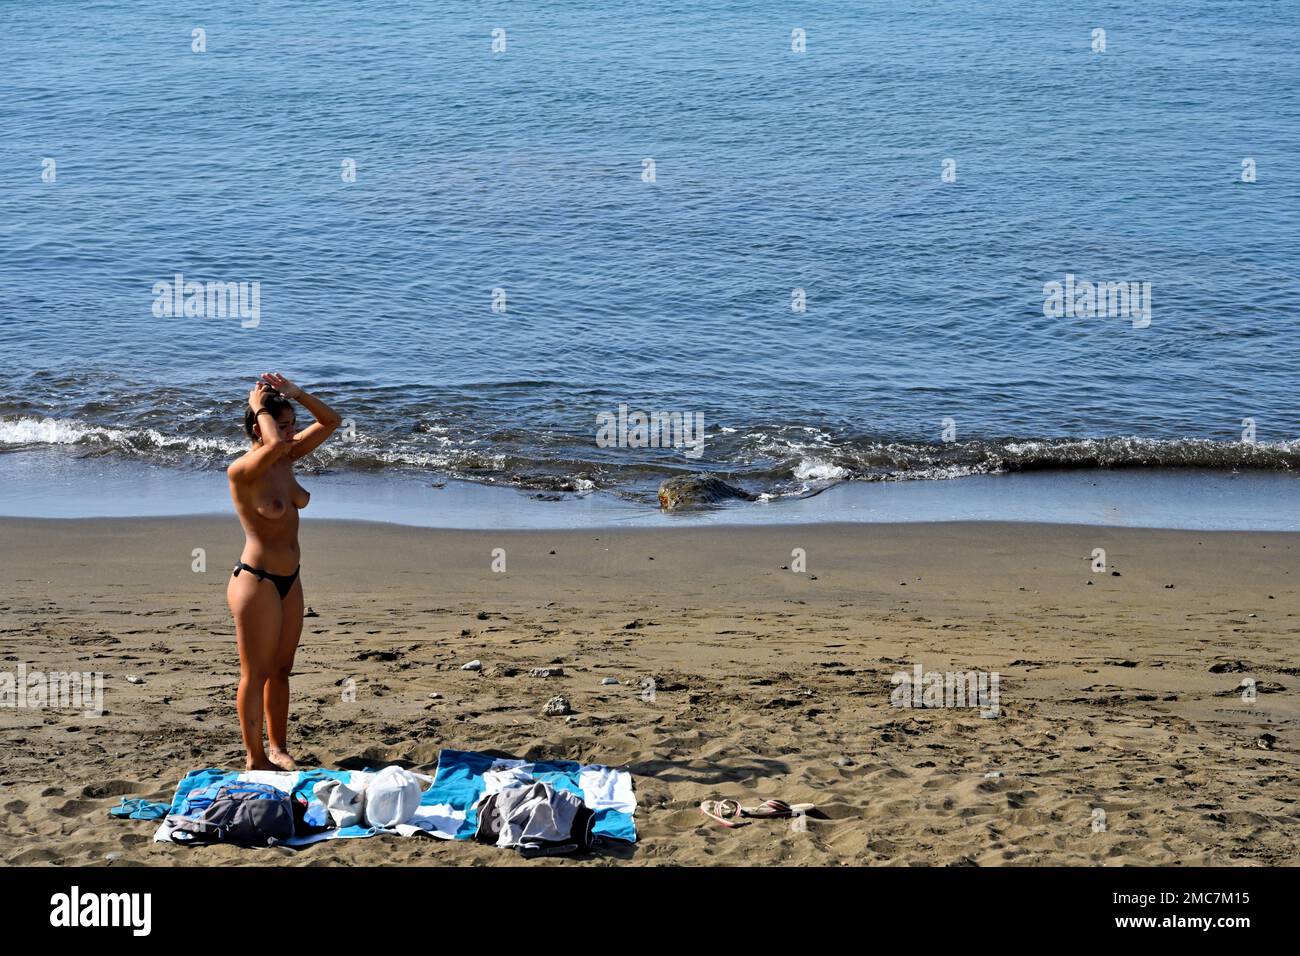 Young woman on sandy beach by waters edge with sea and beach towels Stock Photo